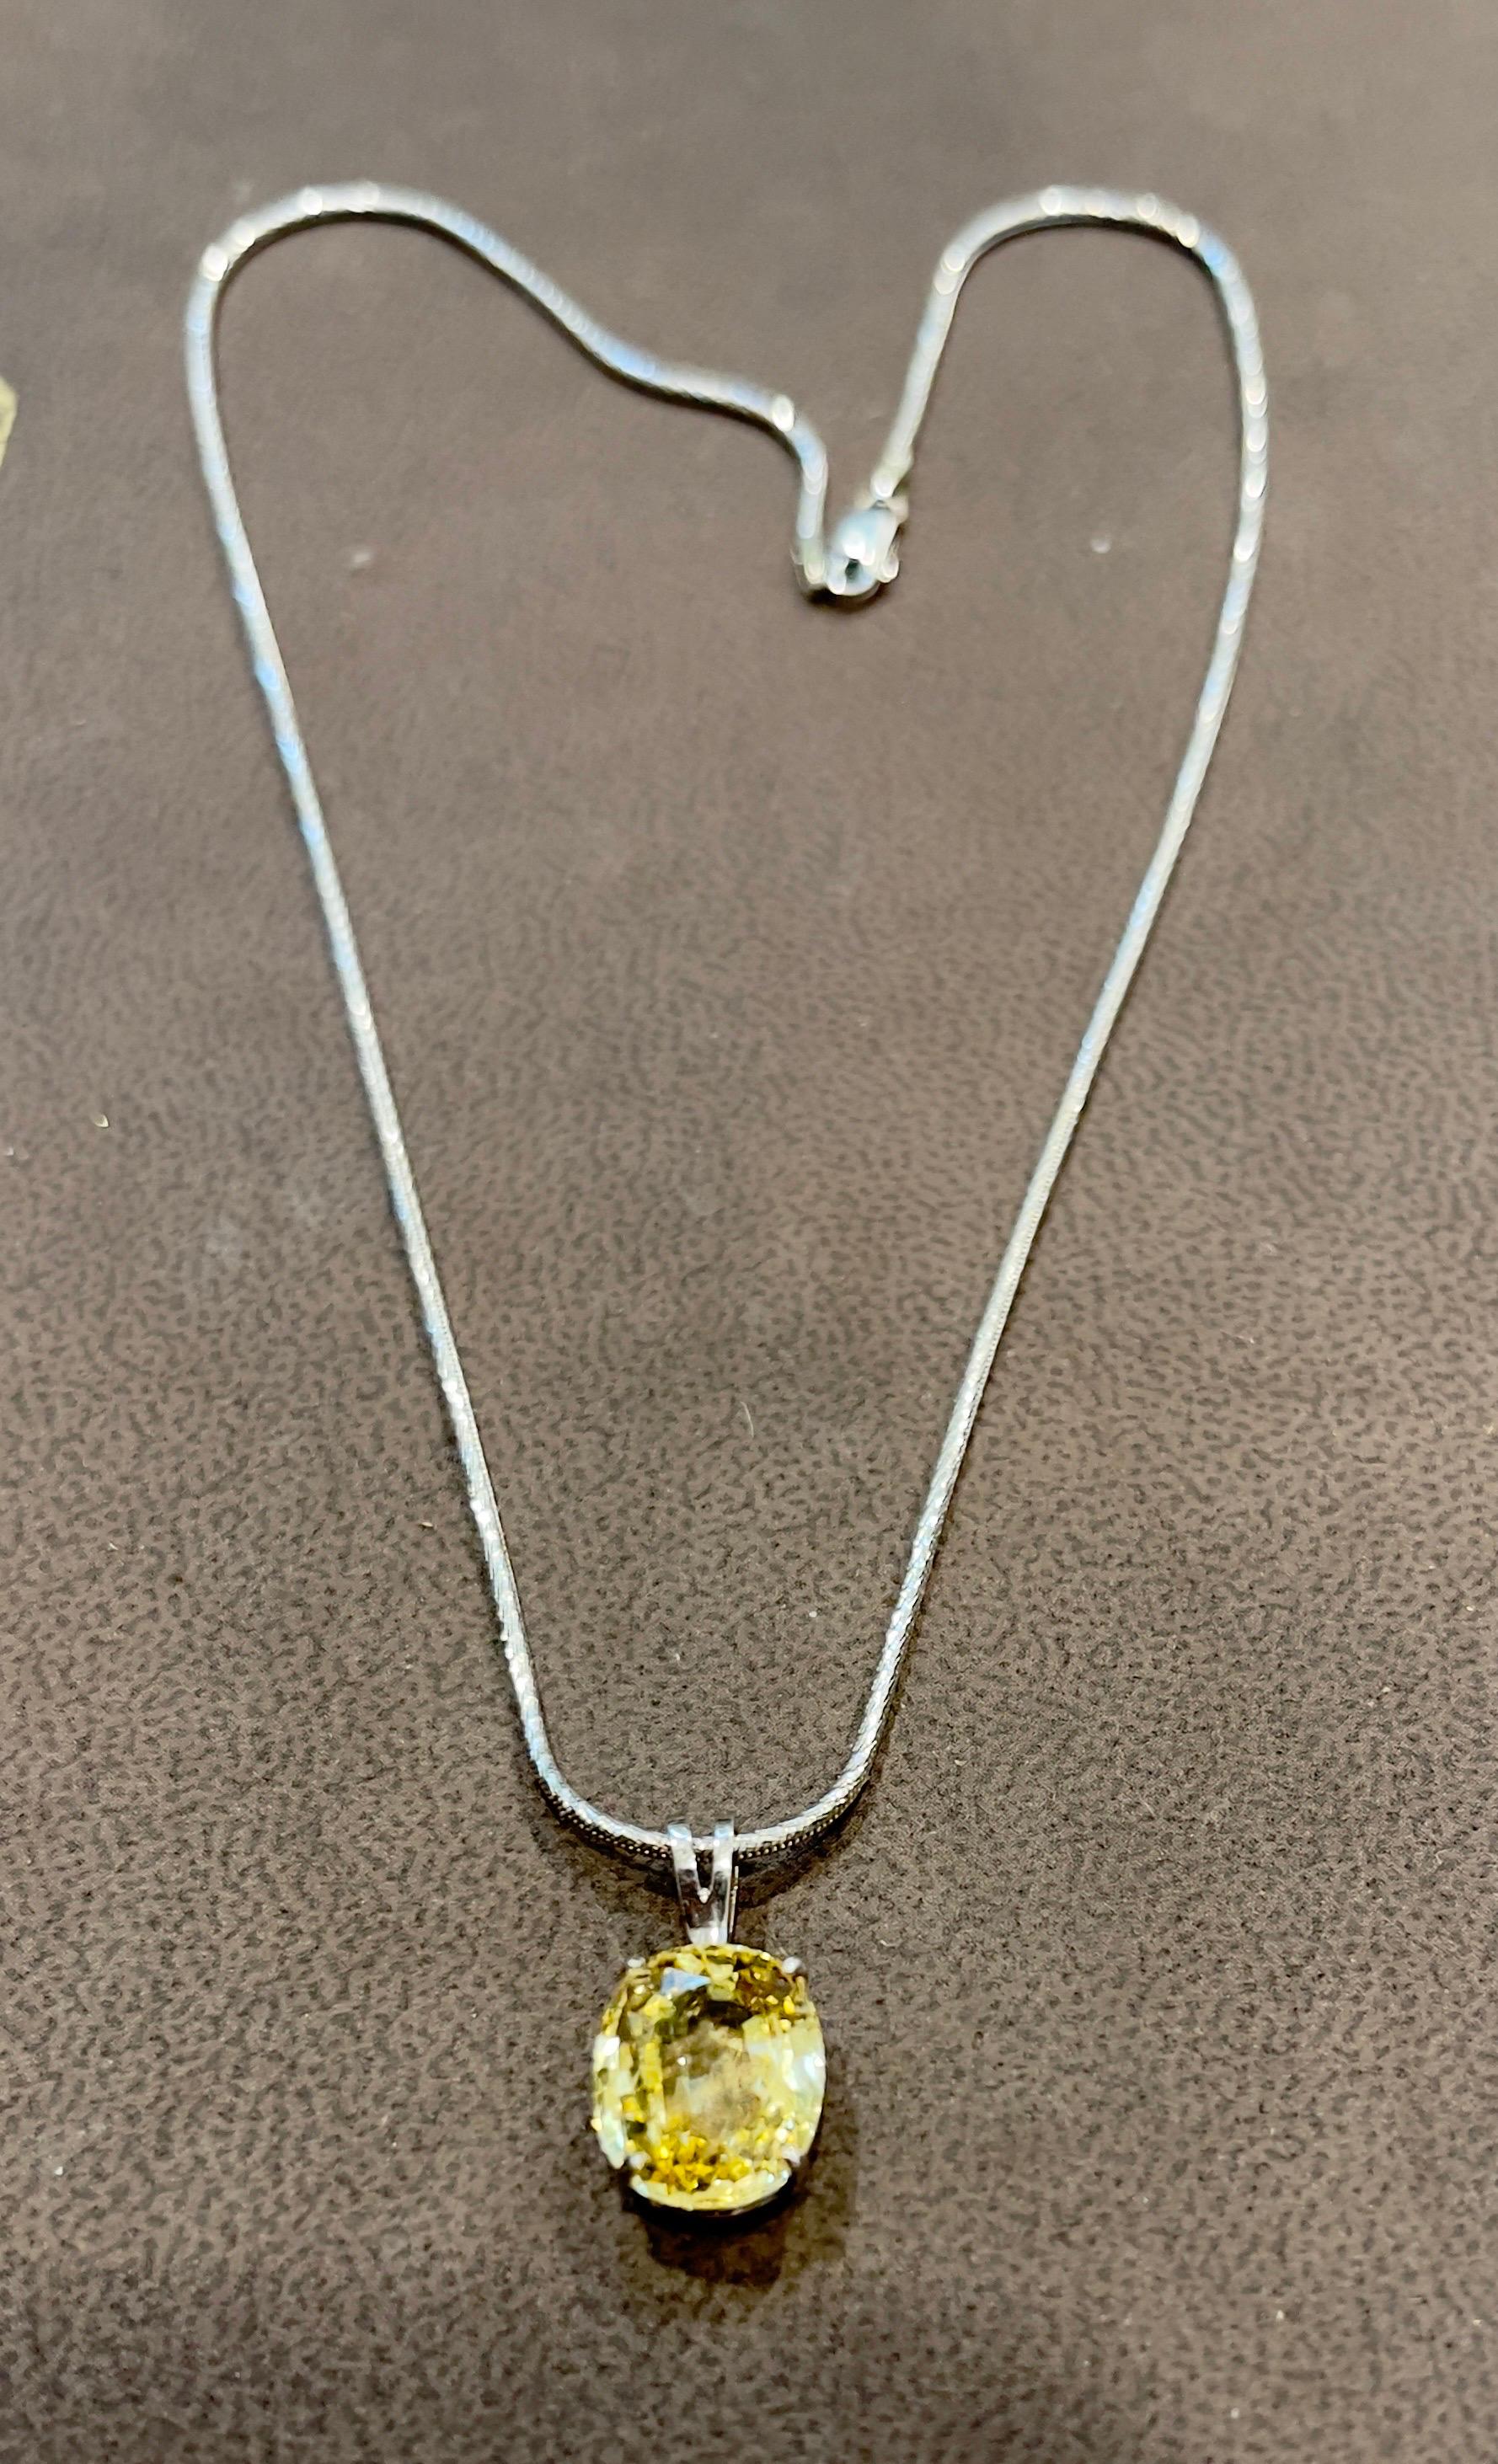 GIA Certified 5.56 Ct Natural Ceylon Yellow Sapphire Pendant Necklace white Gold For Sale 10